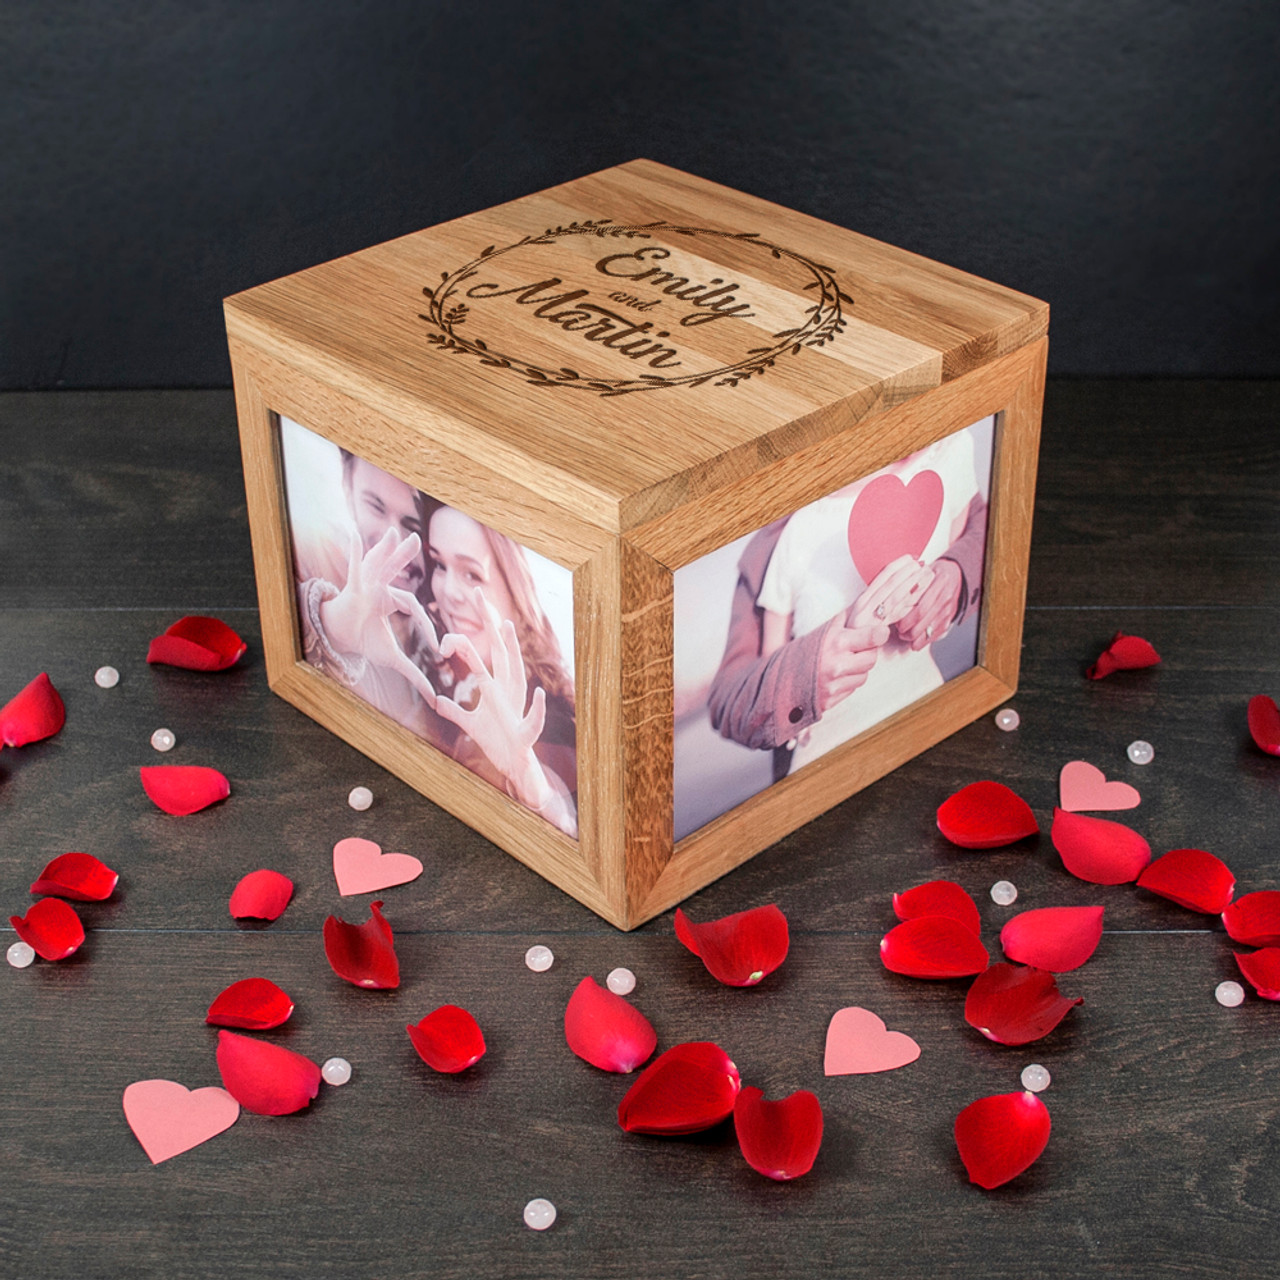 Personalized Wooden Photo Box For Anniversary - Free Shipping